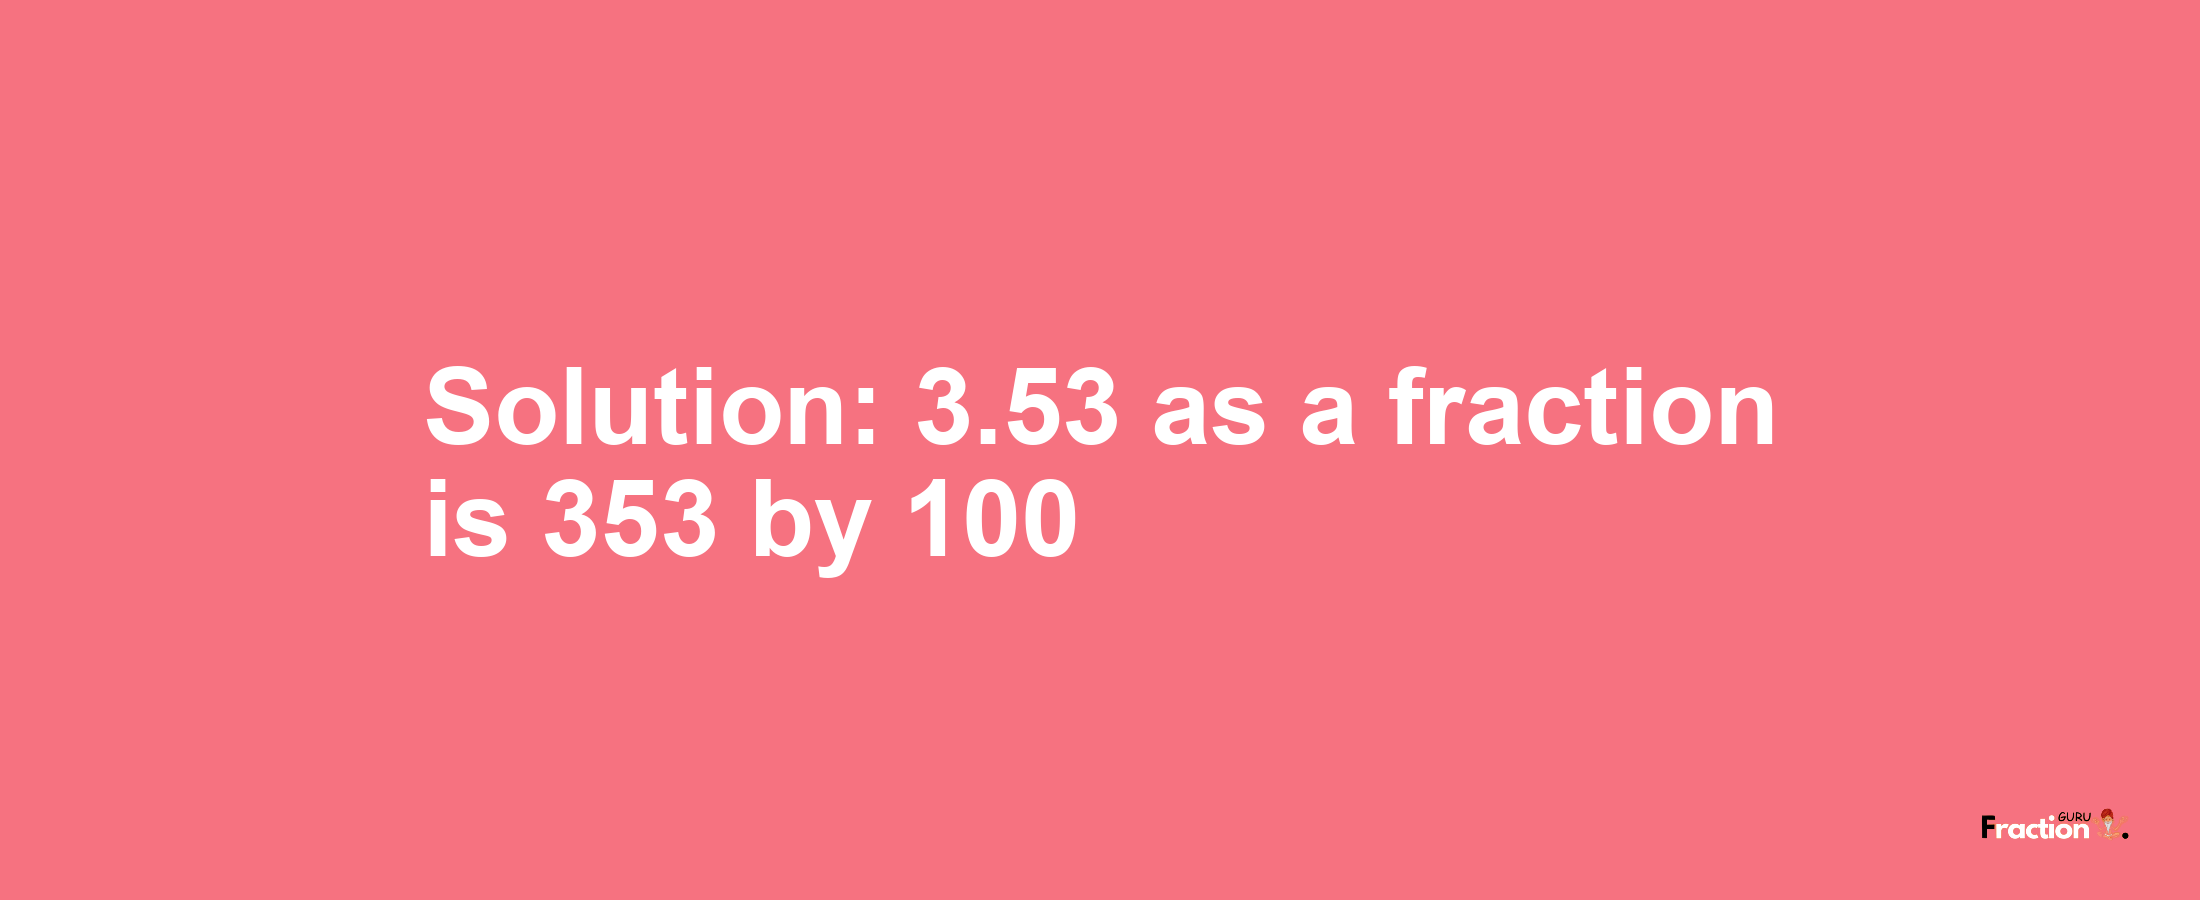 Solution:3.53 as a fraction is 353/100